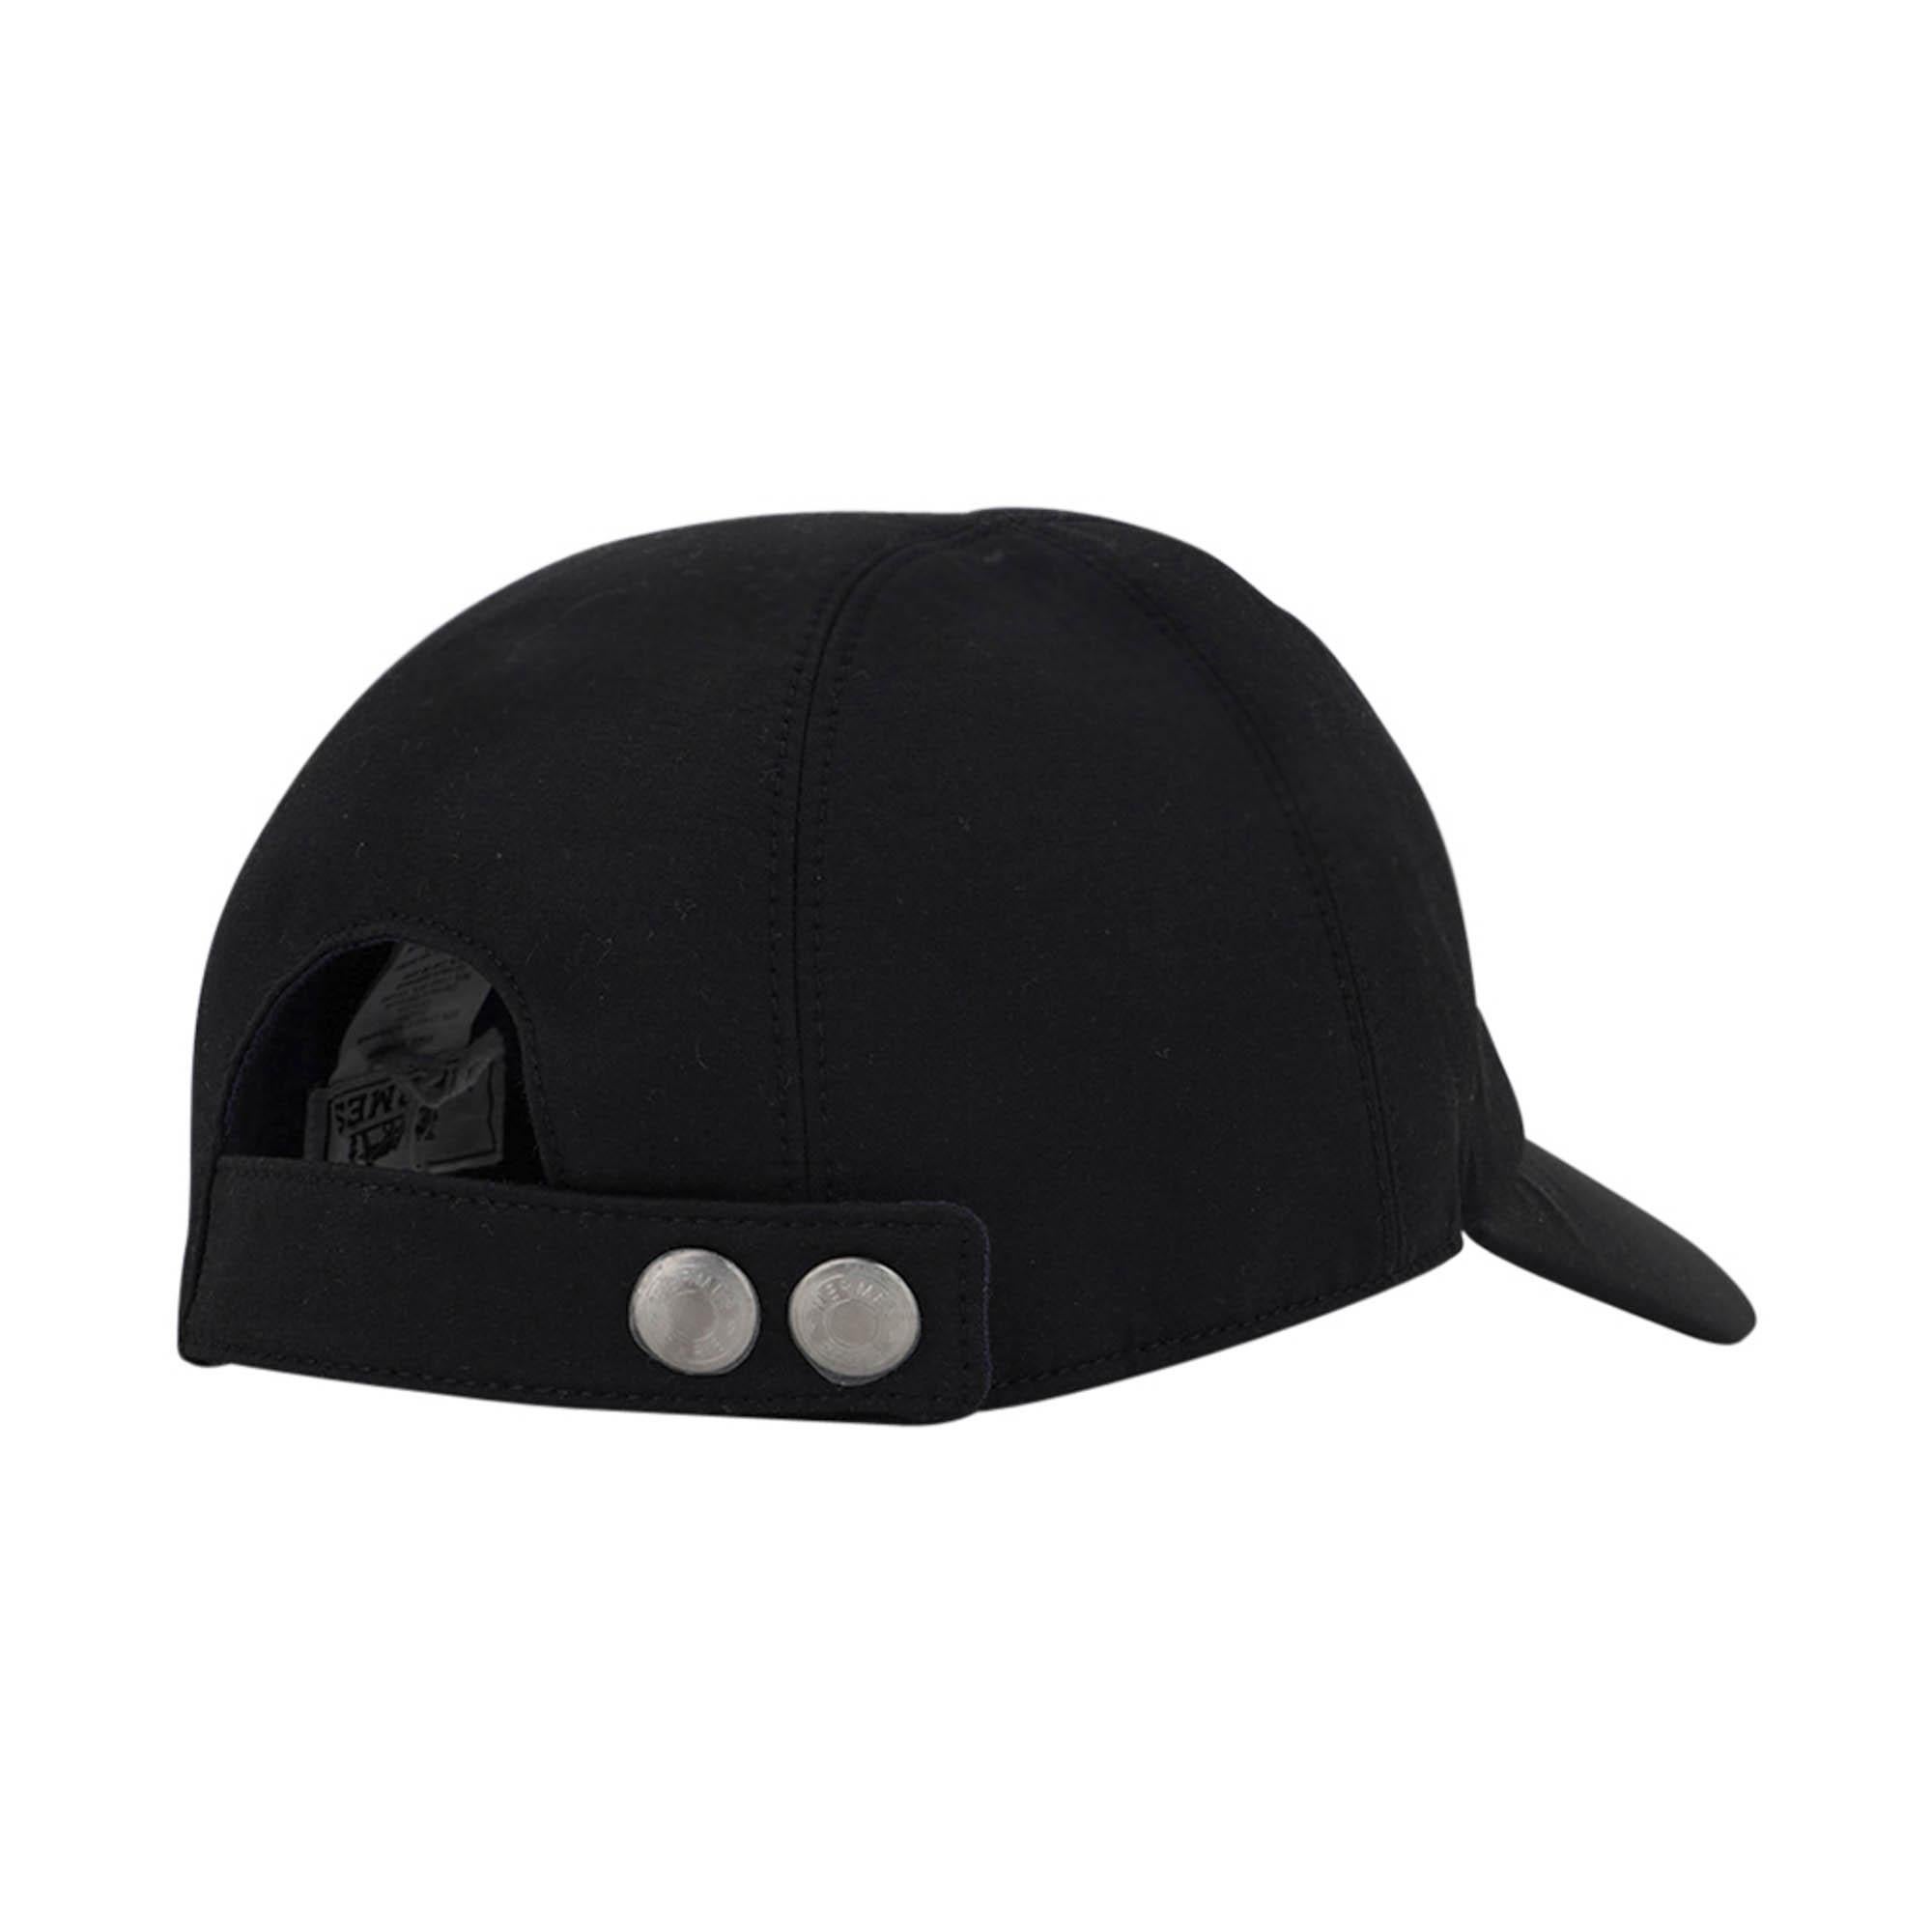 Mightychic offers an Hermes Miles Robot cap featured in Black. 
Swift leather Clou de Selle not stamped on the side in Bleu Encre. 
Brushed palladium Clou de selles snaps at rear. 
Lined in blue.
Water resistant technical gabardine.
Visor length is